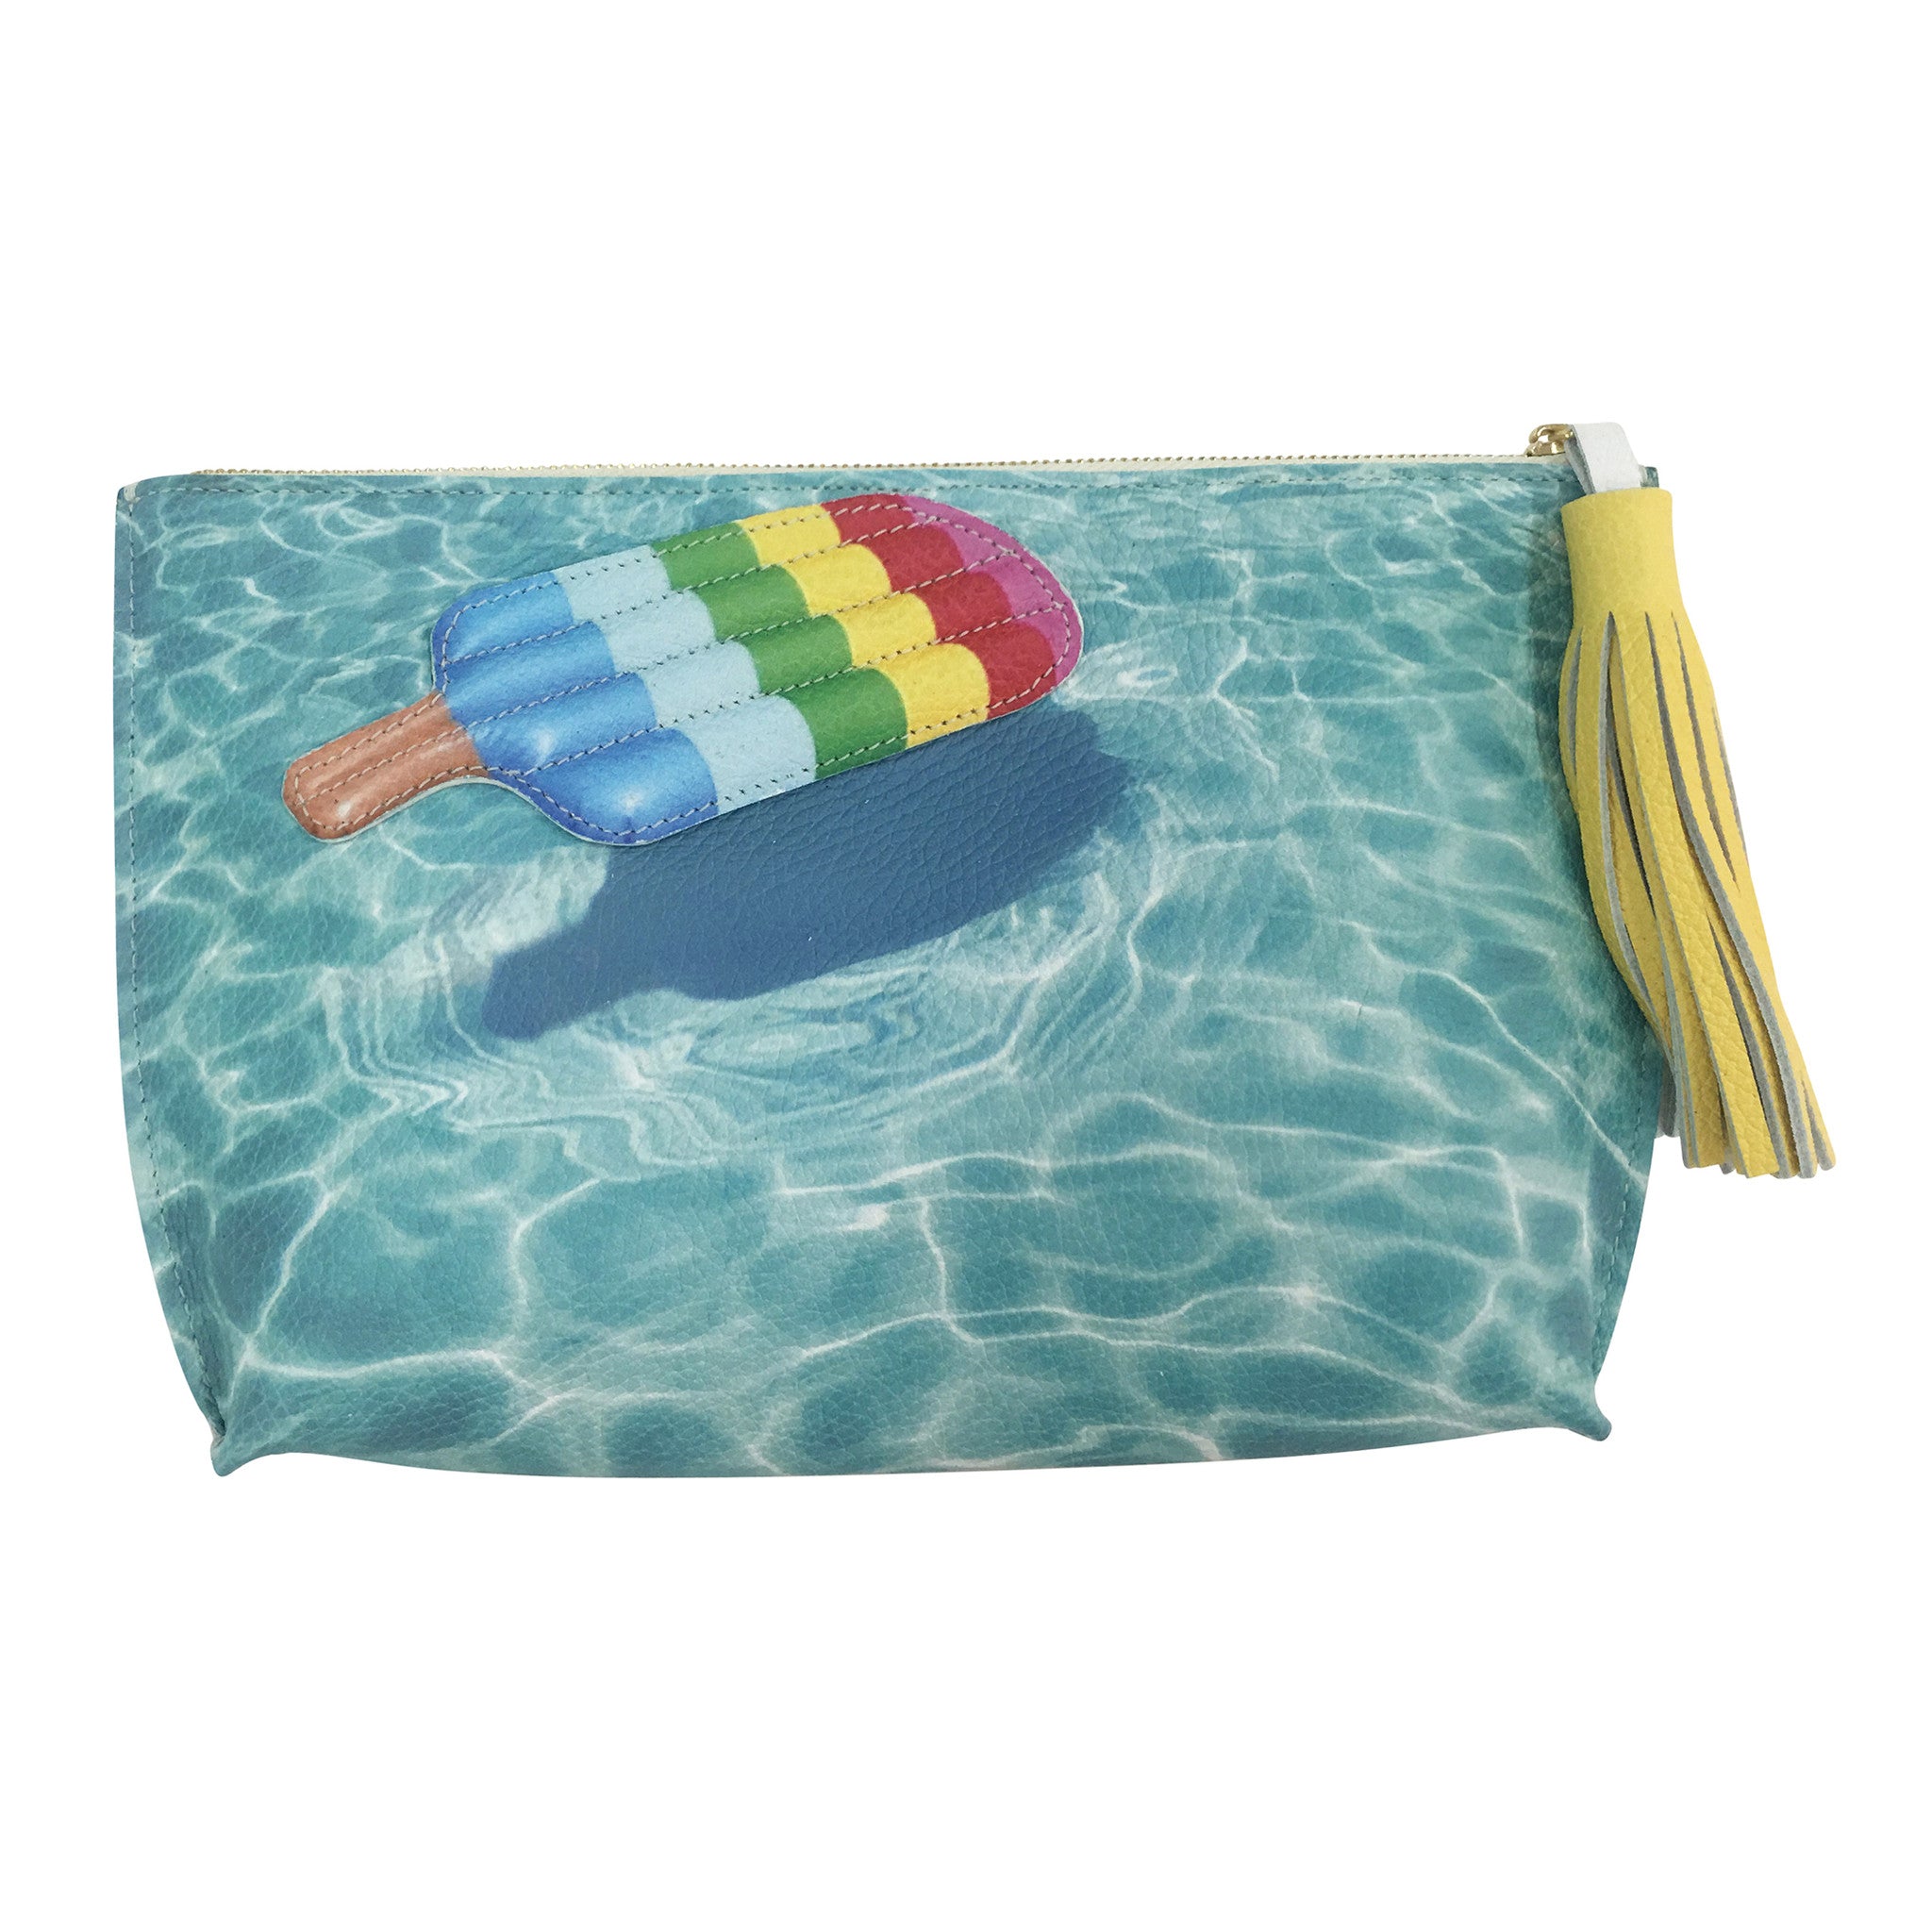 The Popsicle Floatie Soft Clutch